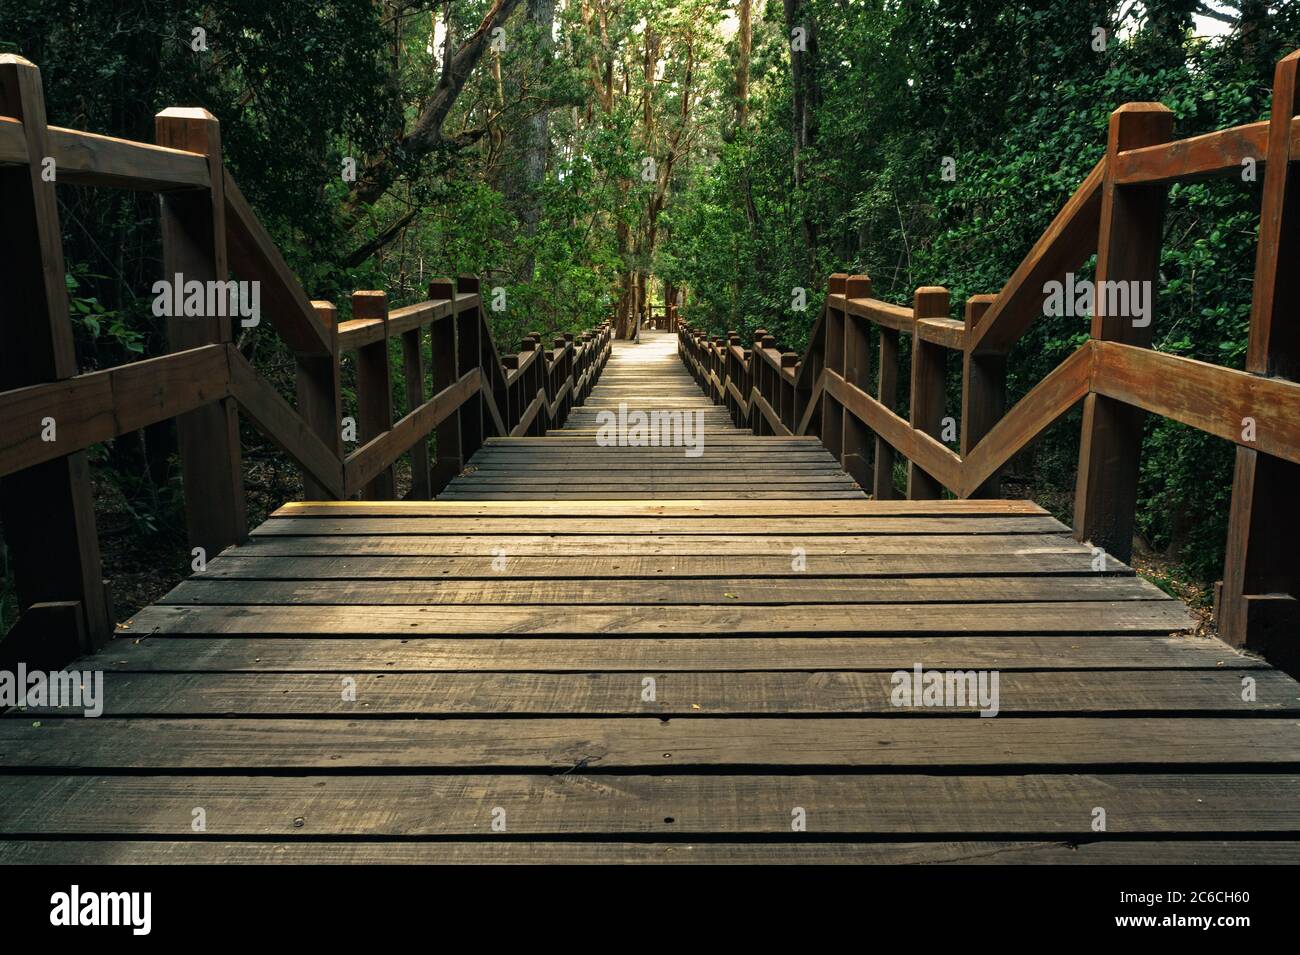 Beautiful wooden path surrounded by trees Stock Photo